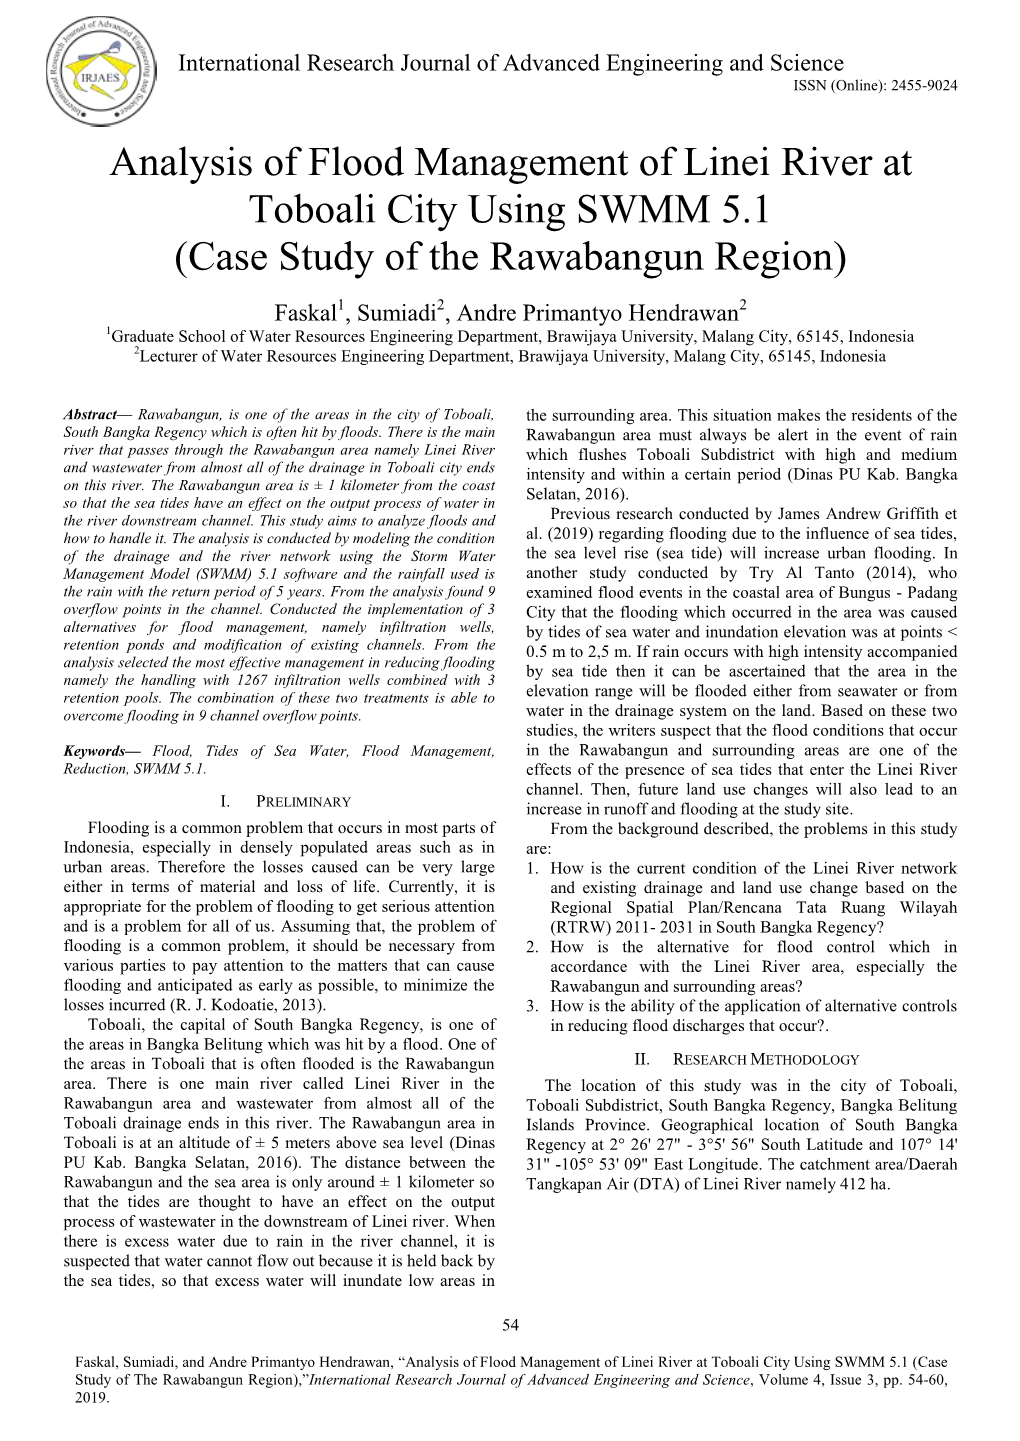 Analysis of Flood Management of Linei River at Toboali City Using SWMM 5.1 (Case Study of the Rawabangun Region)